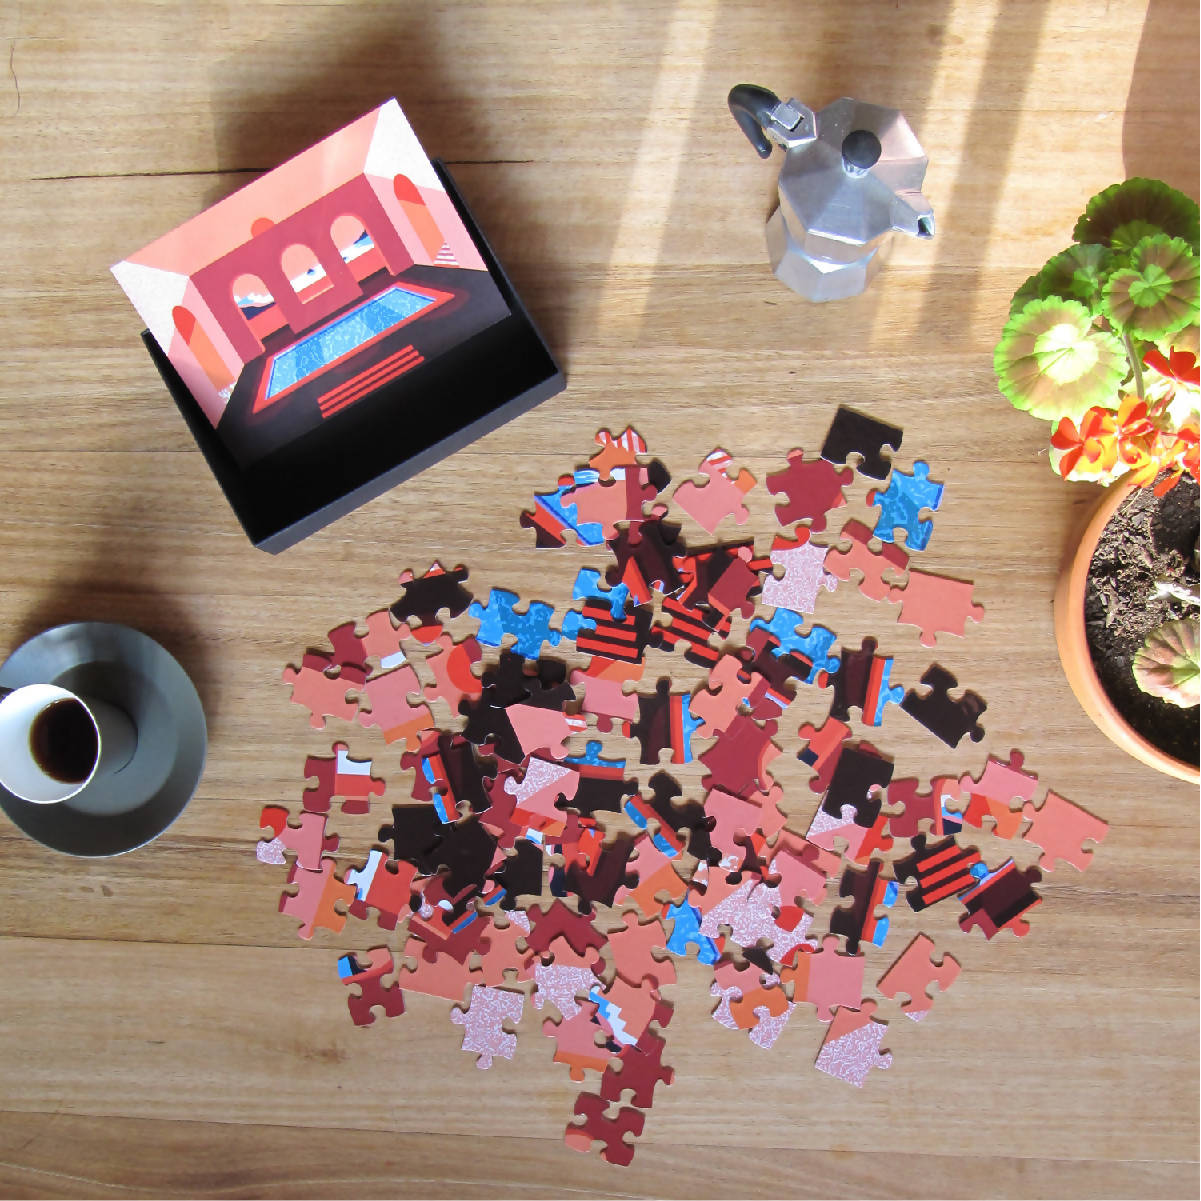 Courtyard Sunset Puzzle by Kim Bischofberger, a Rock Paper Scissors artist collab